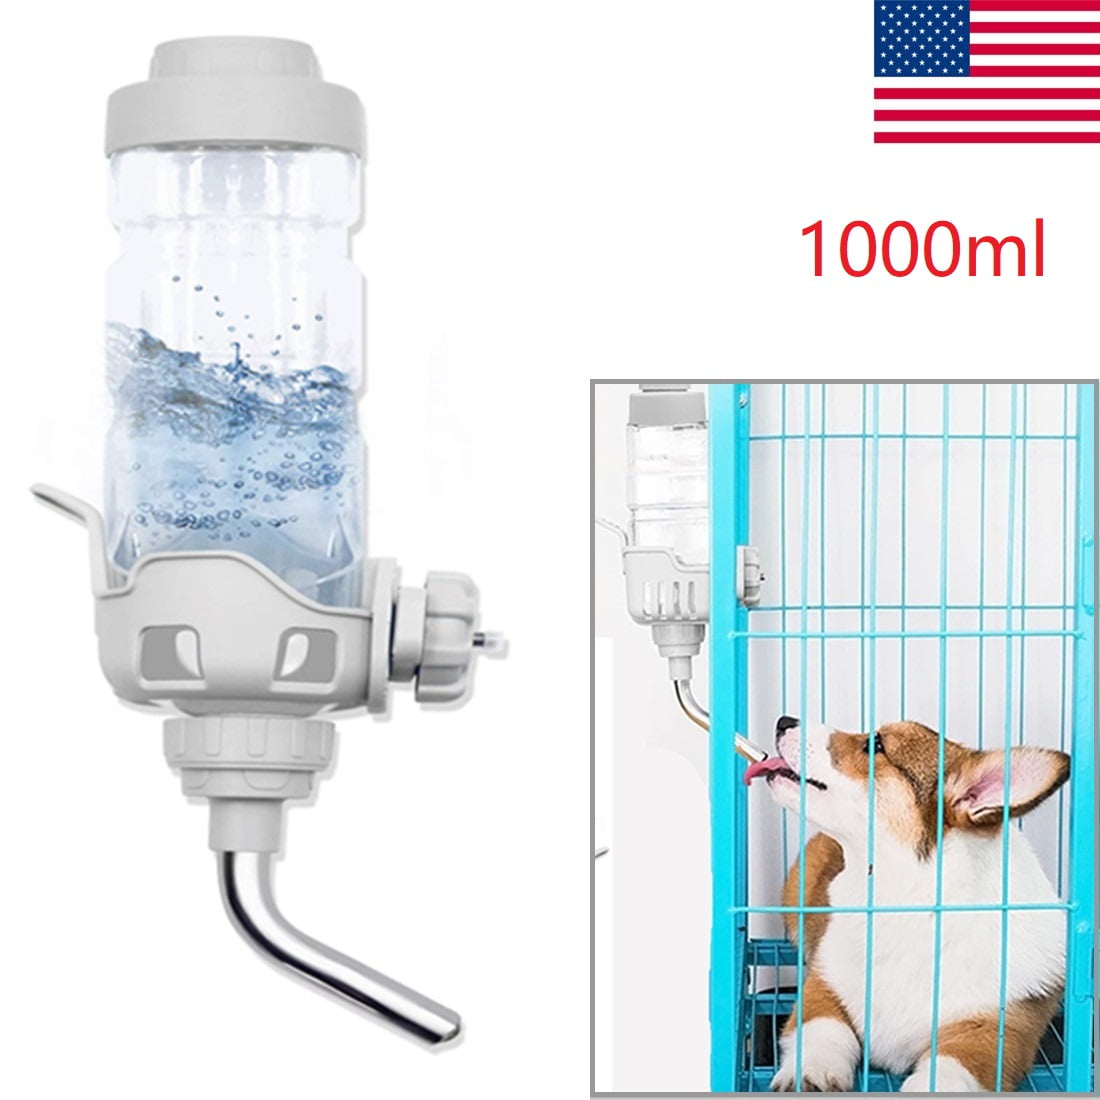 Poodle Pet Water Feeder Bottle Container Dispenser for Cage or Kennel  Gravity Hydration Fountain with Spigot Spout for Dogs, Cats, Hamsters,  Rabbits & Other Small Animals (Crate Water Bottle)